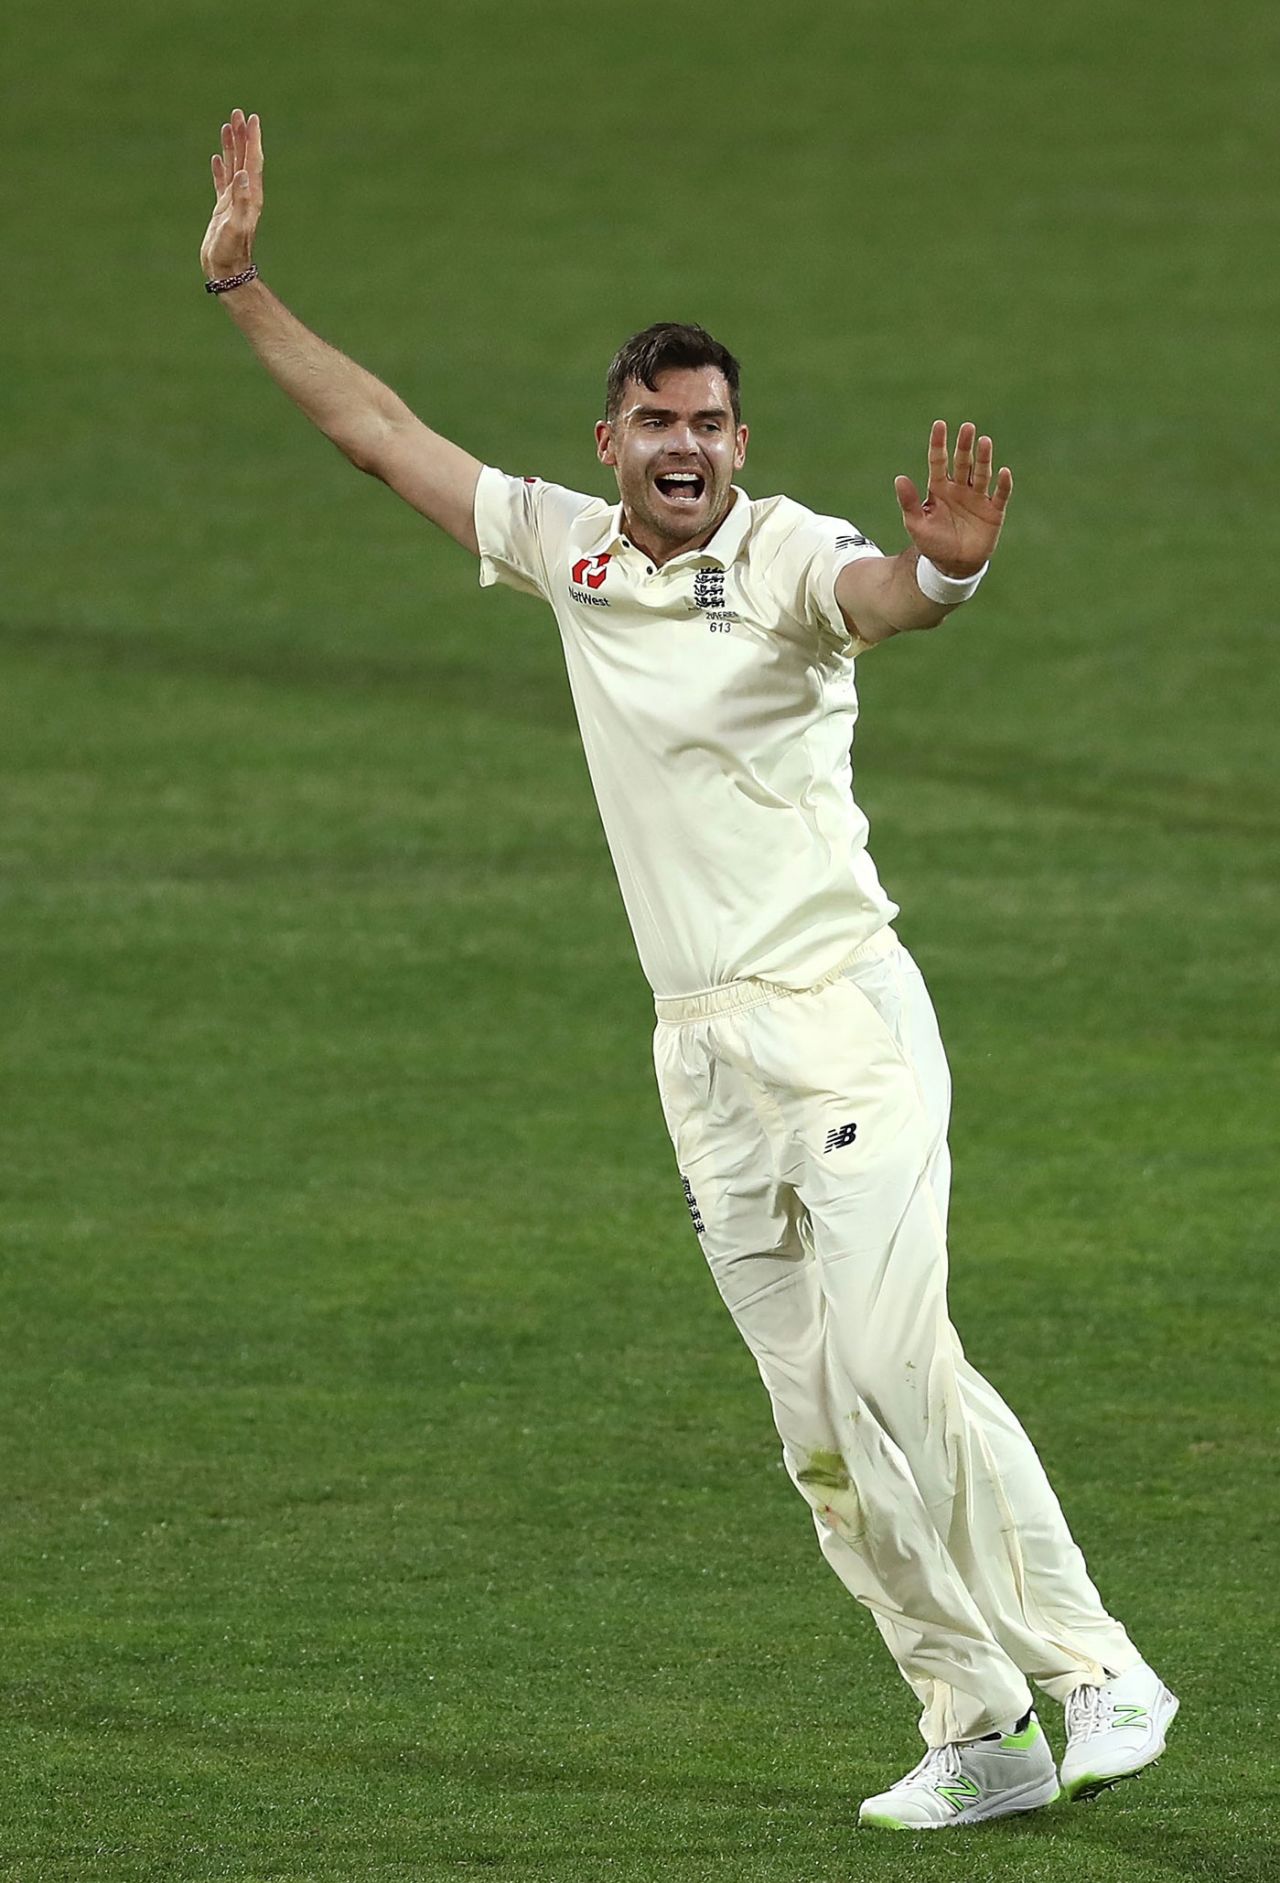 James Anderson continued his wicket-taking form, Cricket Australia XI v England XI, Adelaide, 2nd day, November 9, 2017